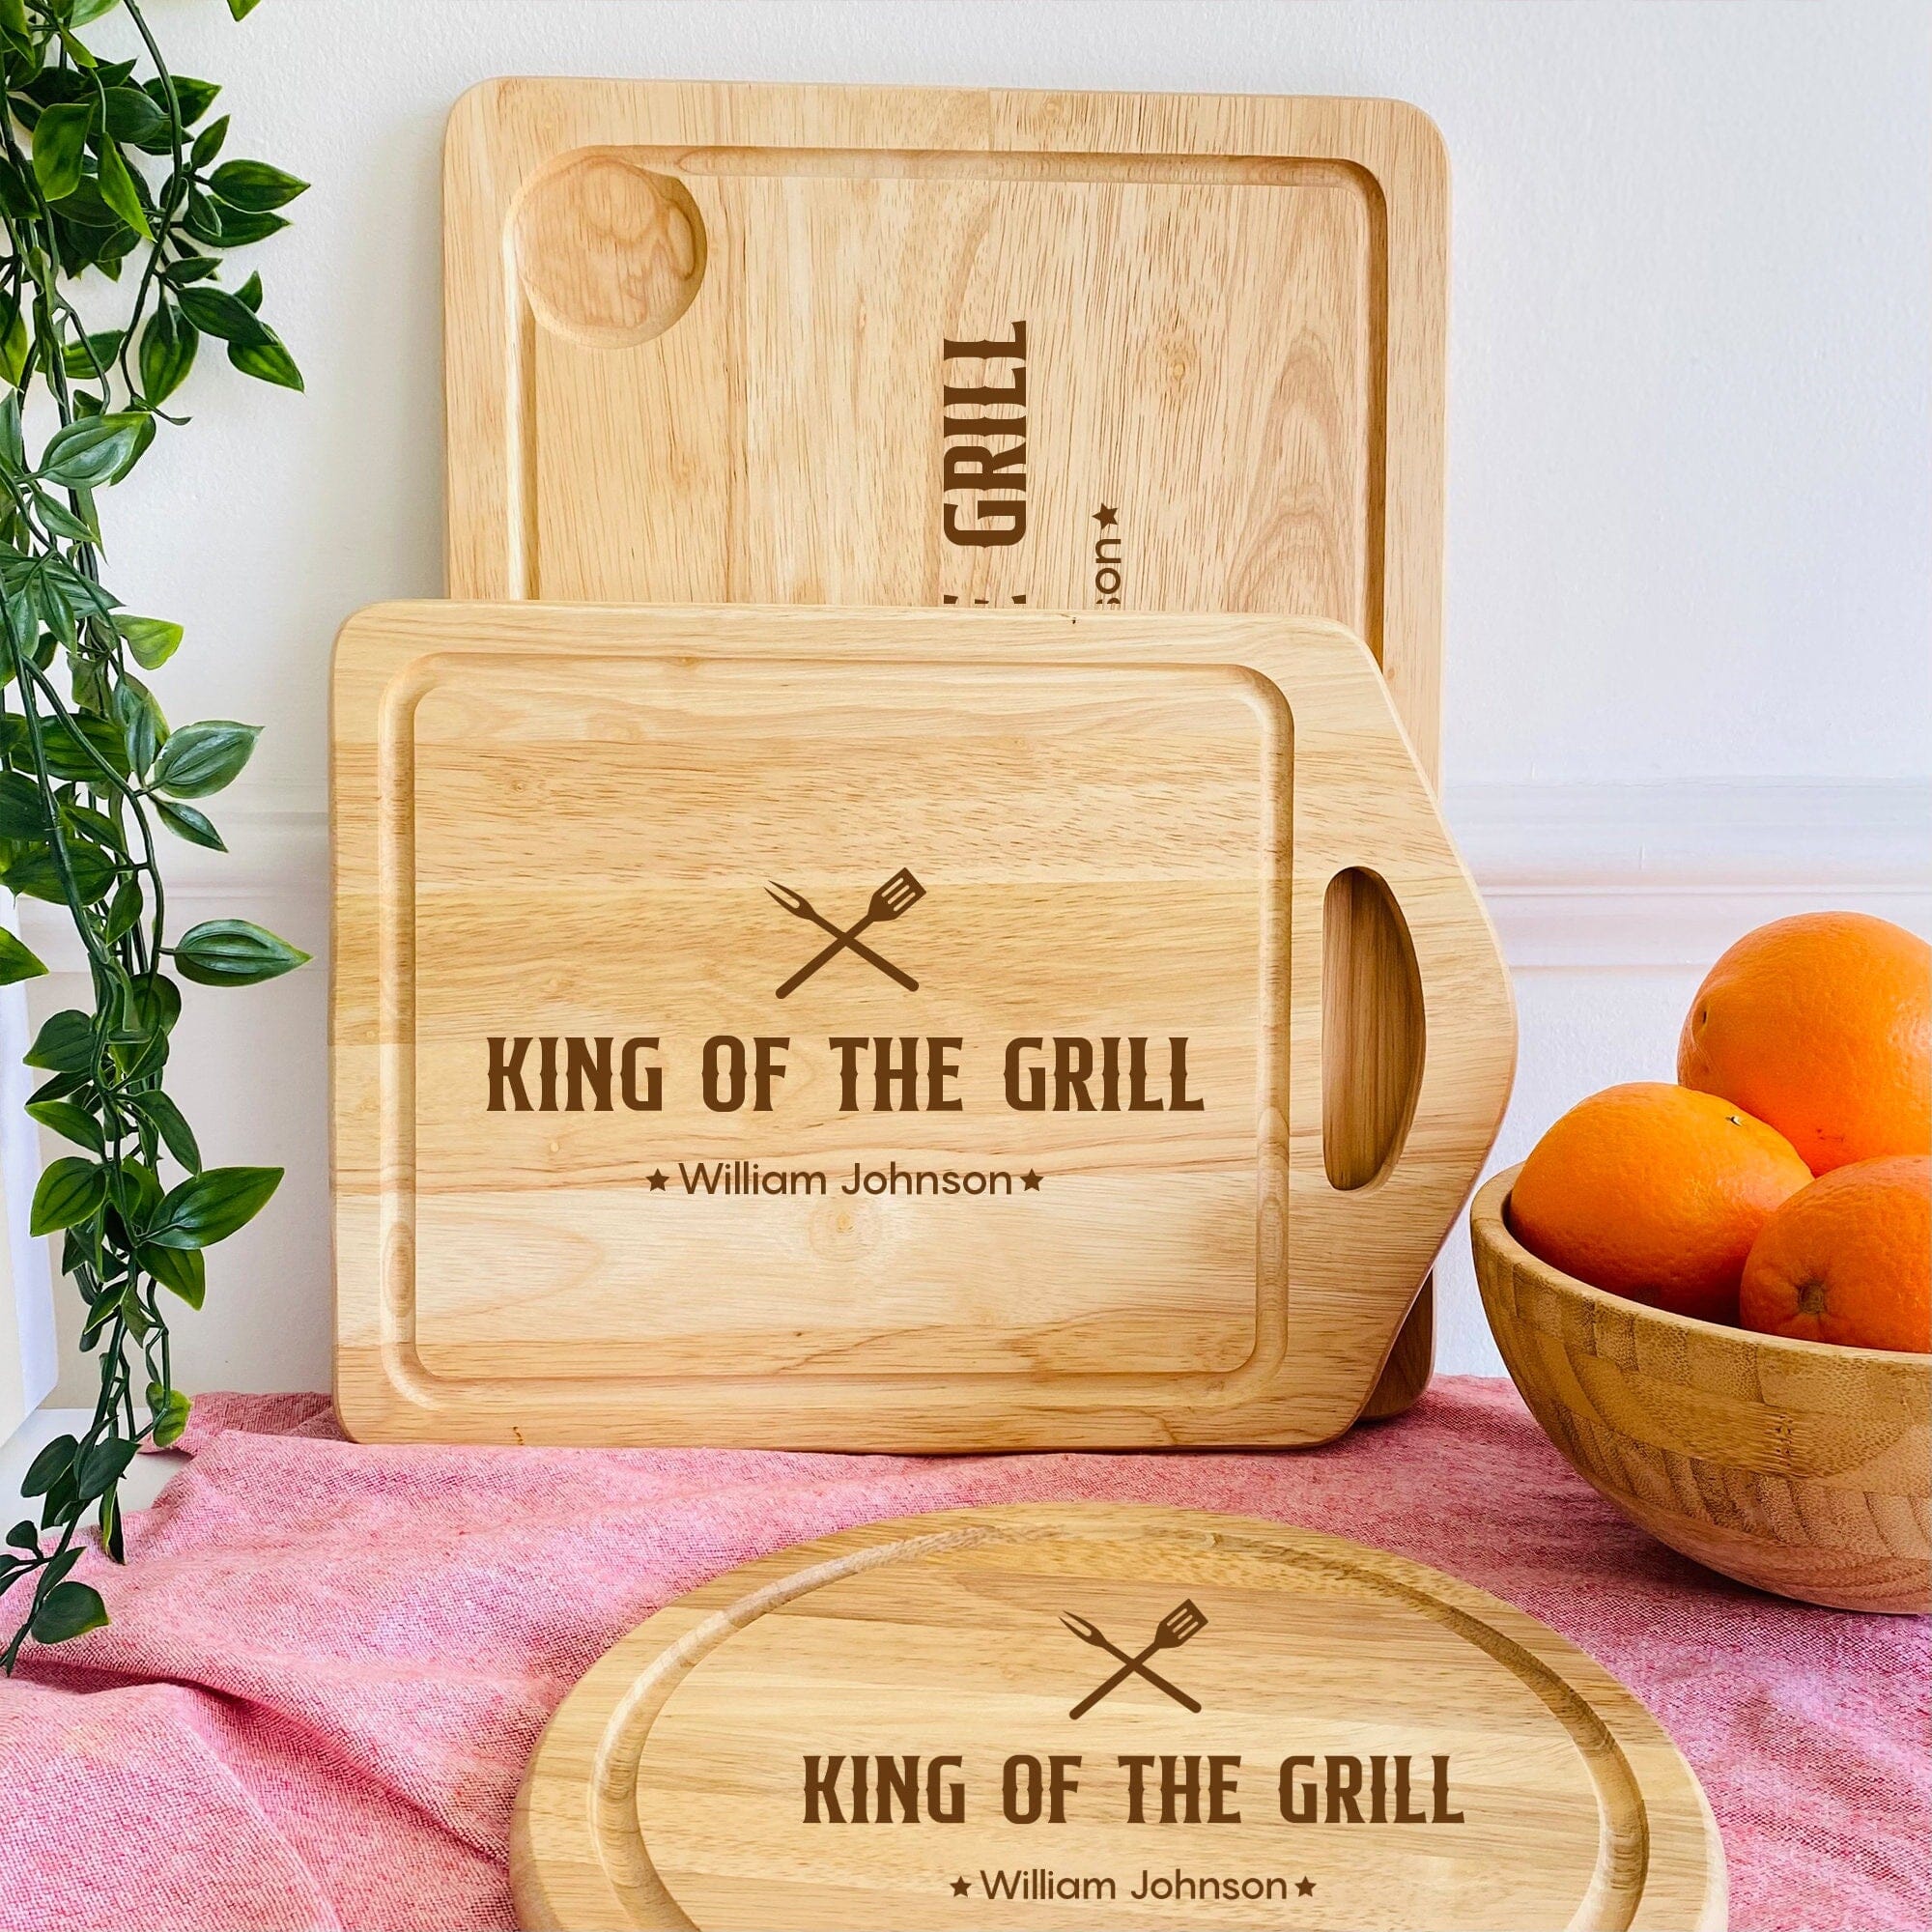 Personalised Laser Engraved King Of The Grill Wooden Board, Gift For Dad Grandma Uncle His, Father'S Day